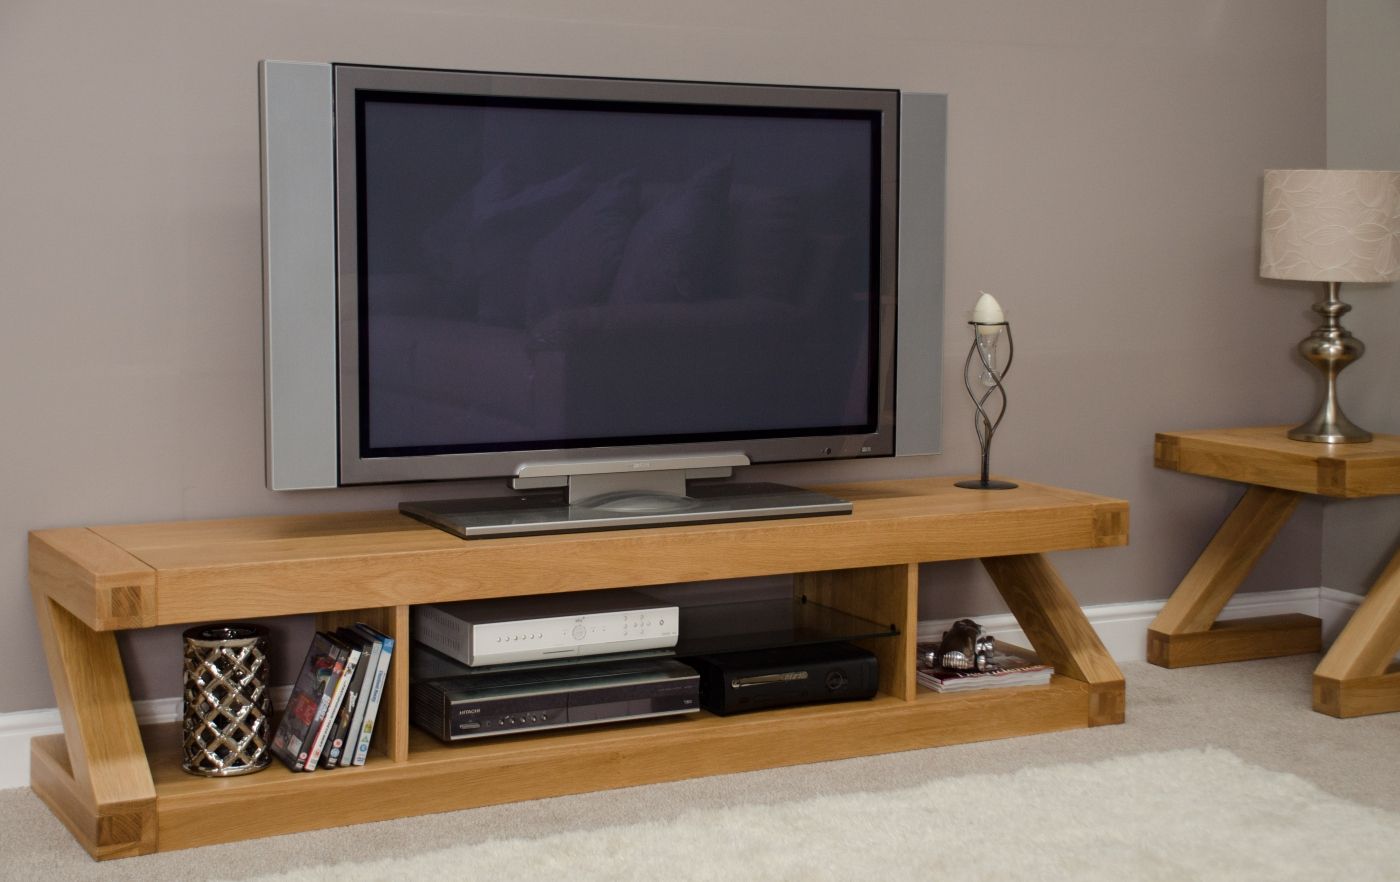 Z Solid Oak Designer Furniture Large Widescreen Tv Cabinet Pertaining To Oak Furniture Tv Stands (View 7 of 15)